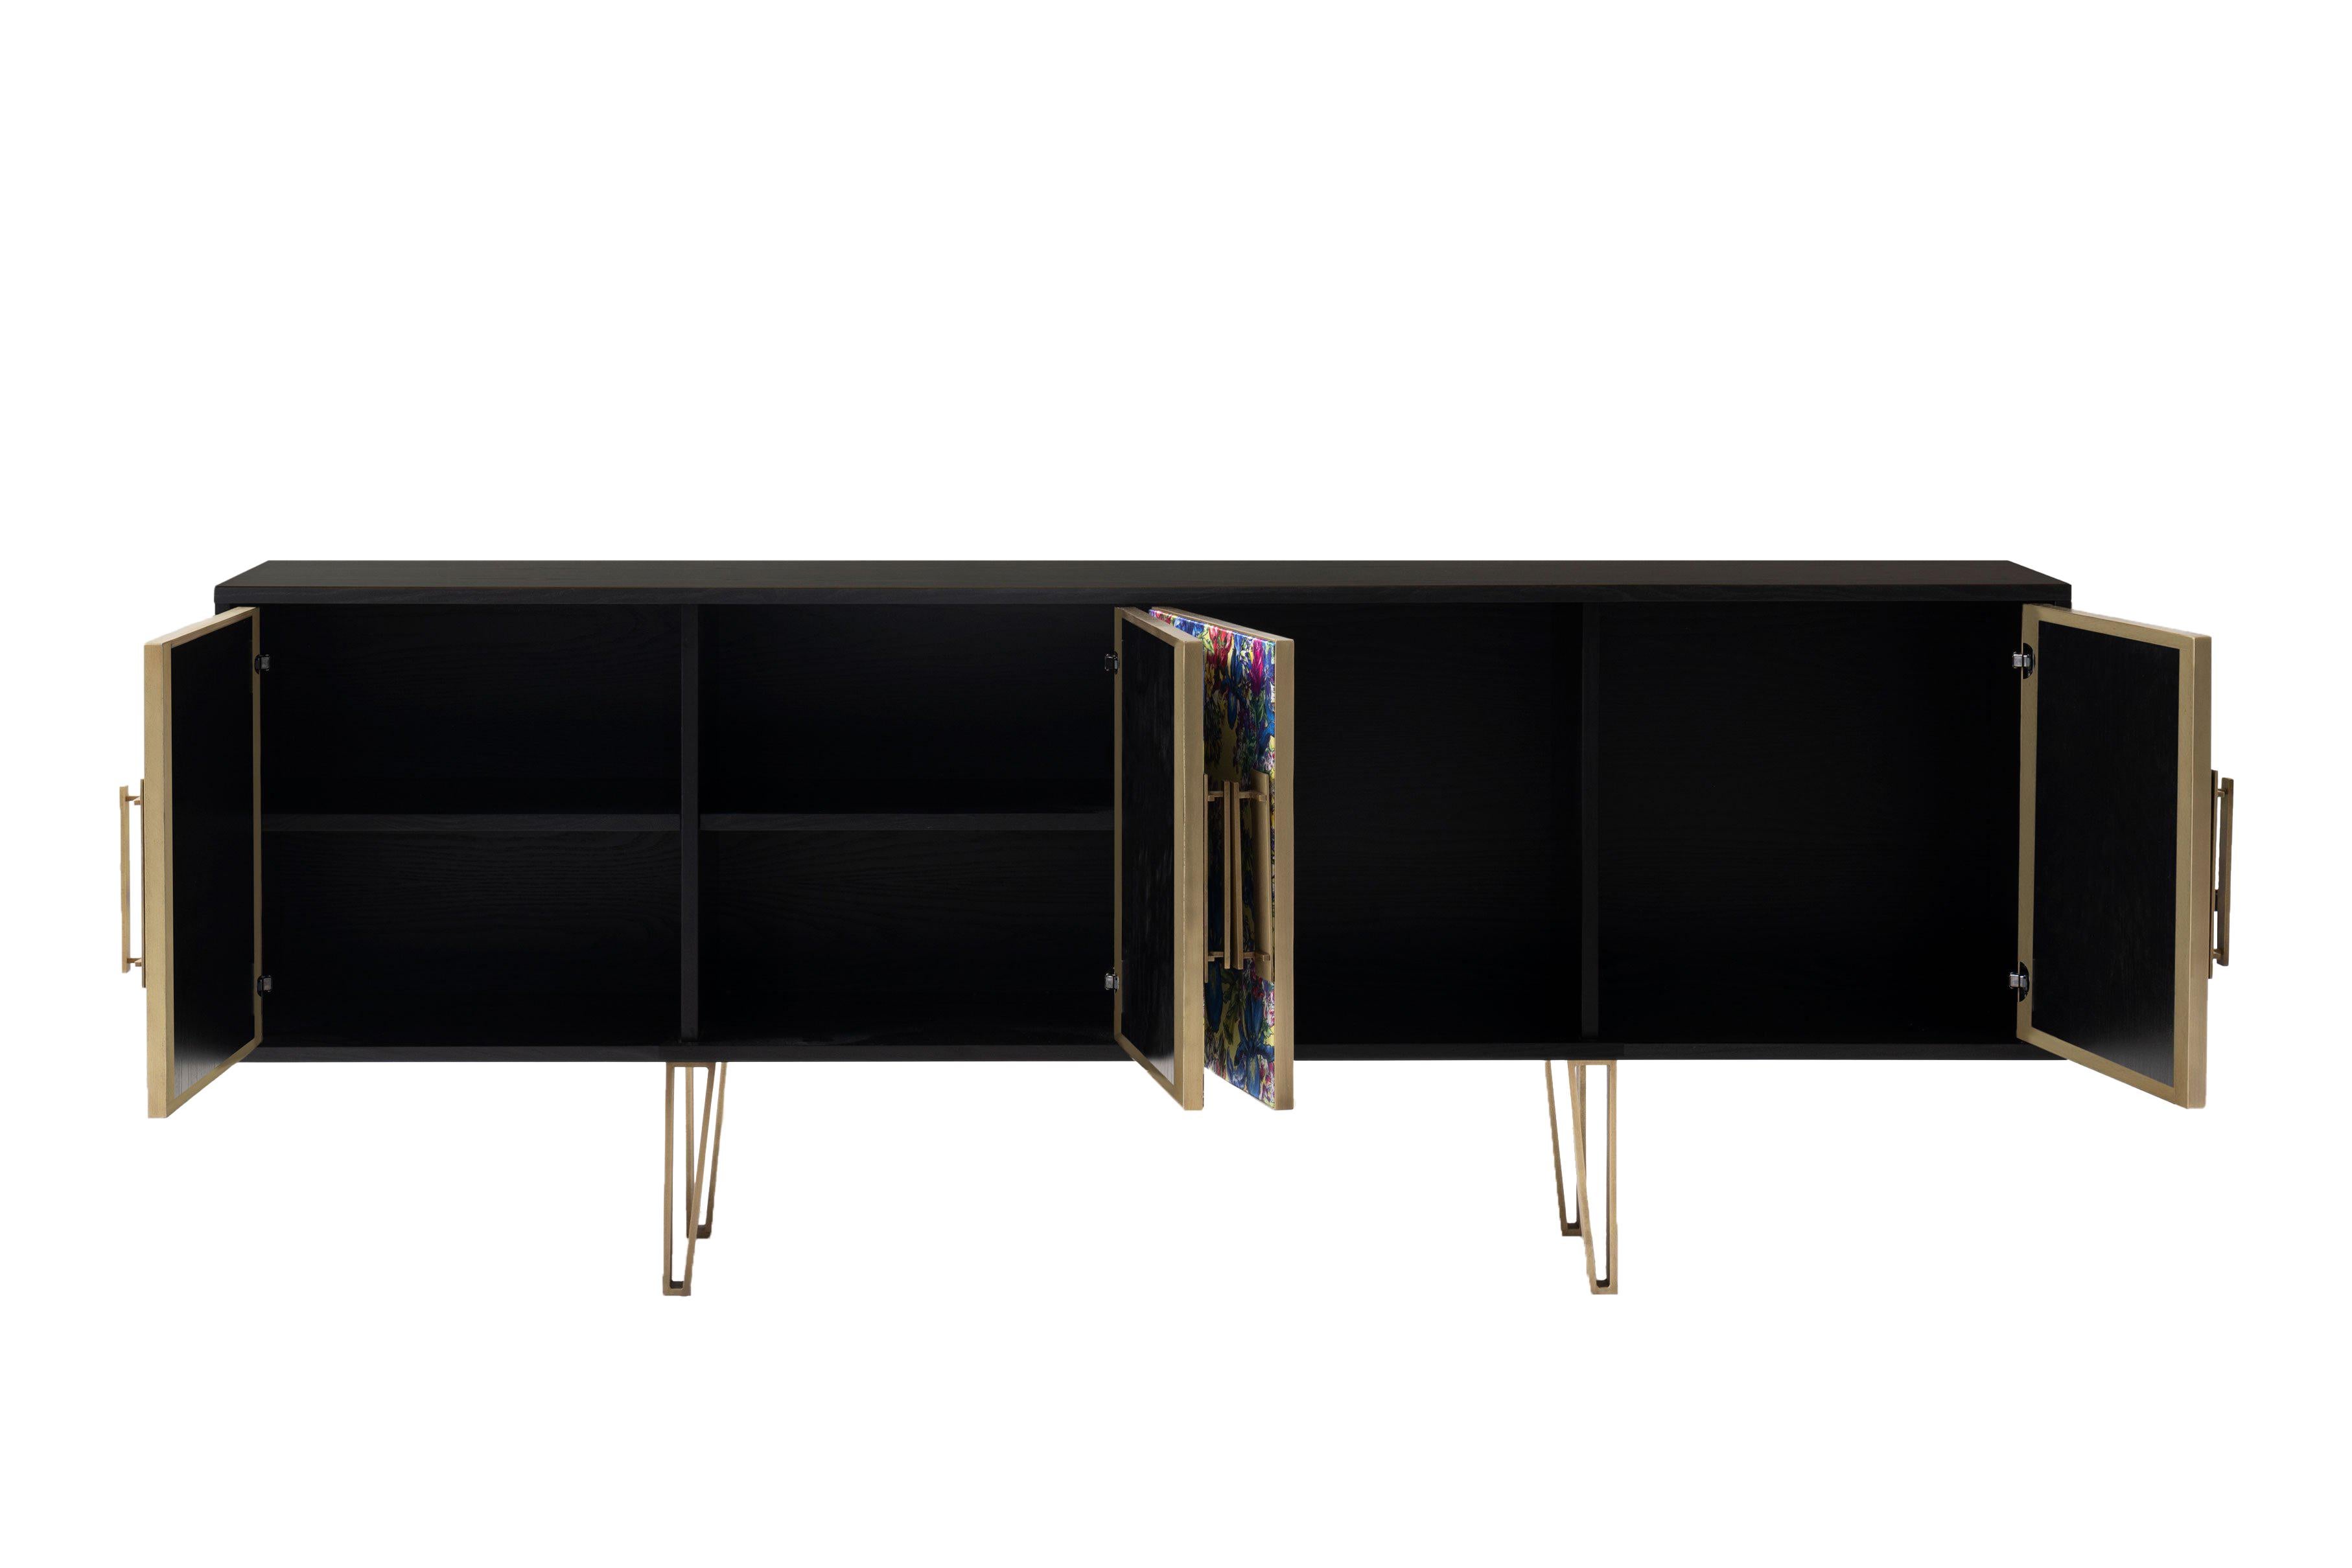 Showcasing FELDER FELDER’S striking Zebra Butterfly print, the Blake Sideboard combines luxurious design with generous storage.

Handcrafted in England from lacquered oak wood veneers, this statement piece is fine upholstered in sumptuous silk-blend